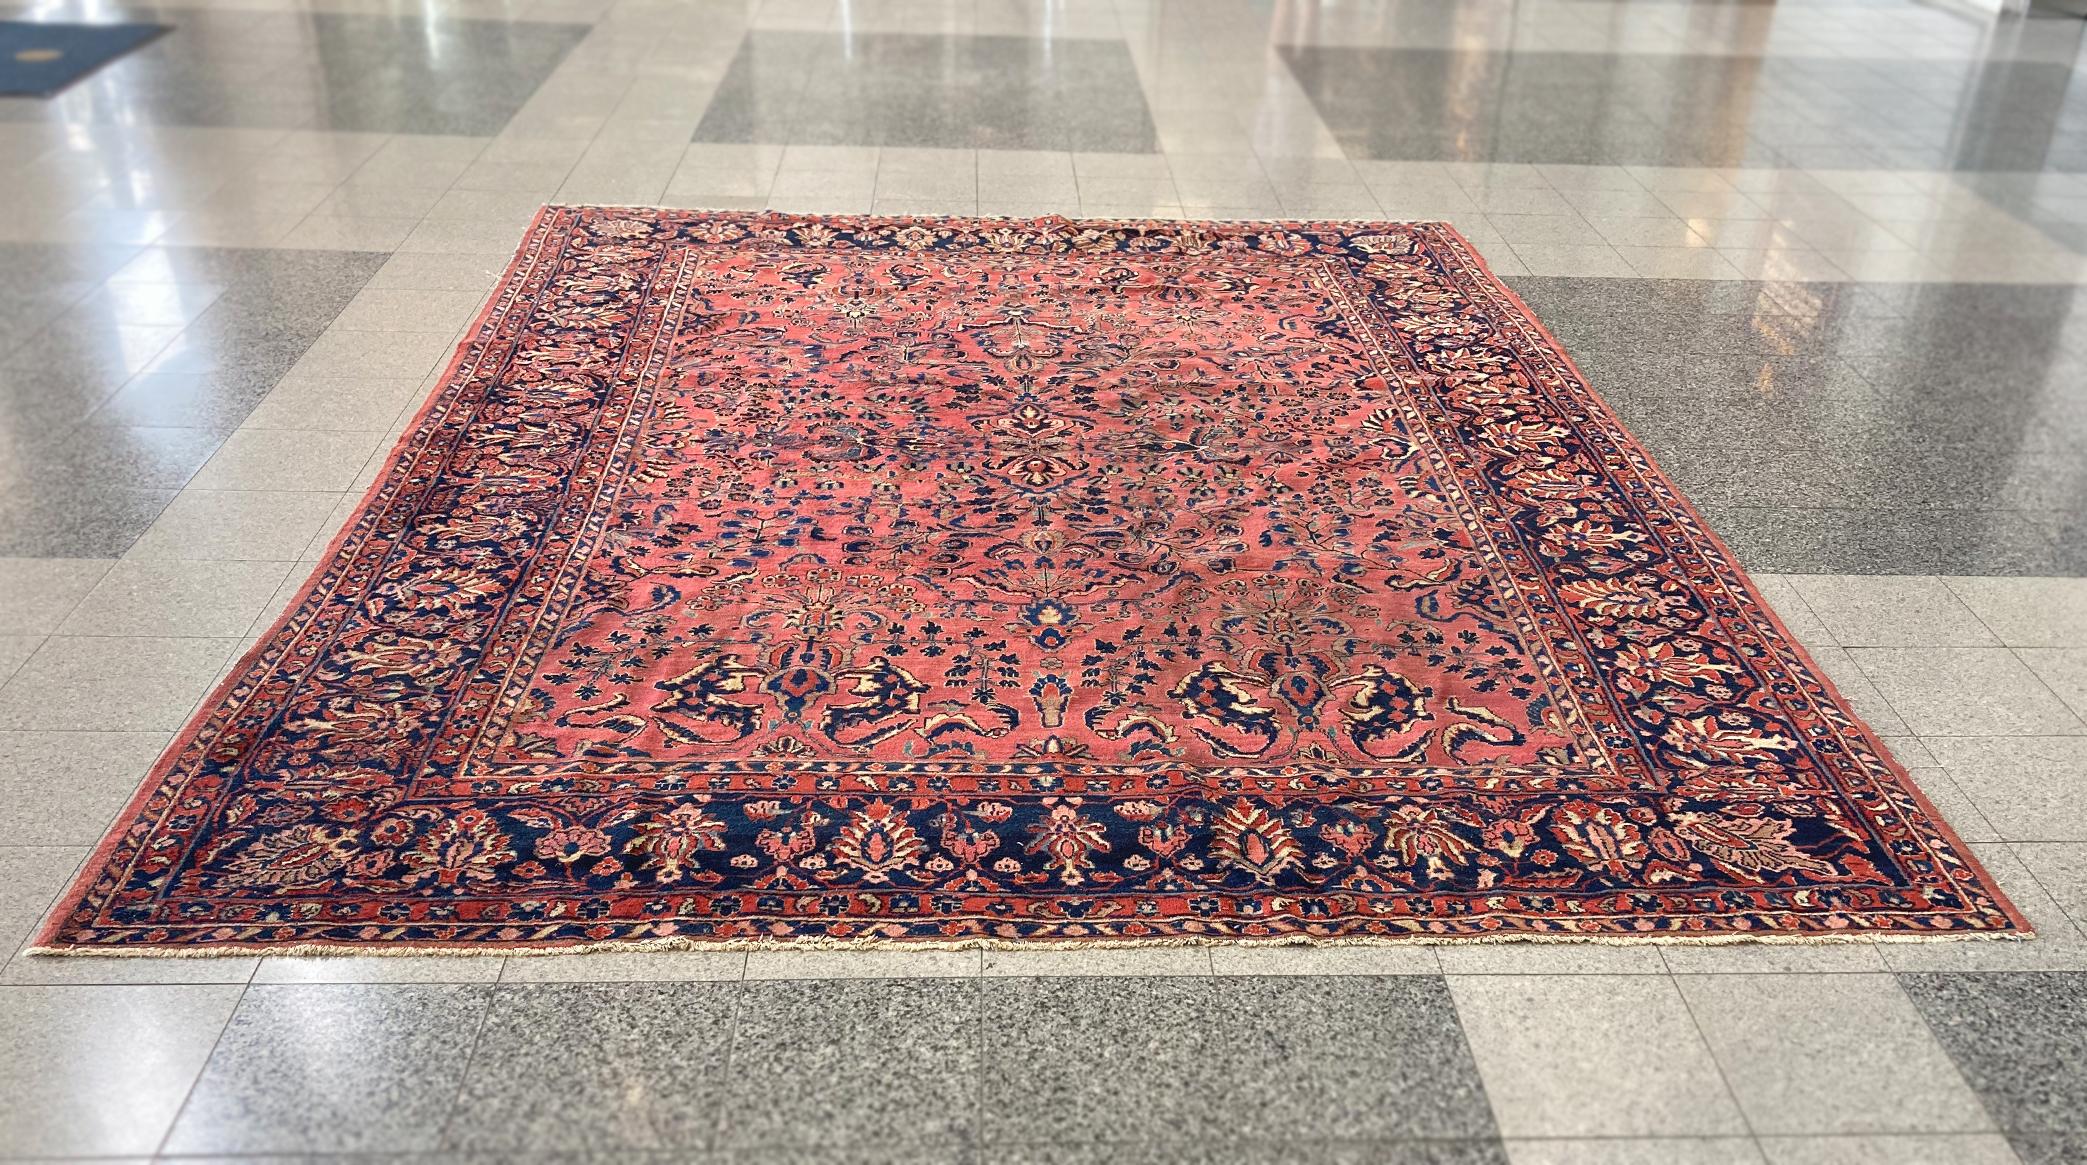 A richly hued Sarouk rug, handwoven, mid-20th century. The rug's palette is a beautiful arrangement of blues and gold on a red field. Floral and vine motifs fill the central rectangle, framed by a border of densely patterned blue and red bands. We